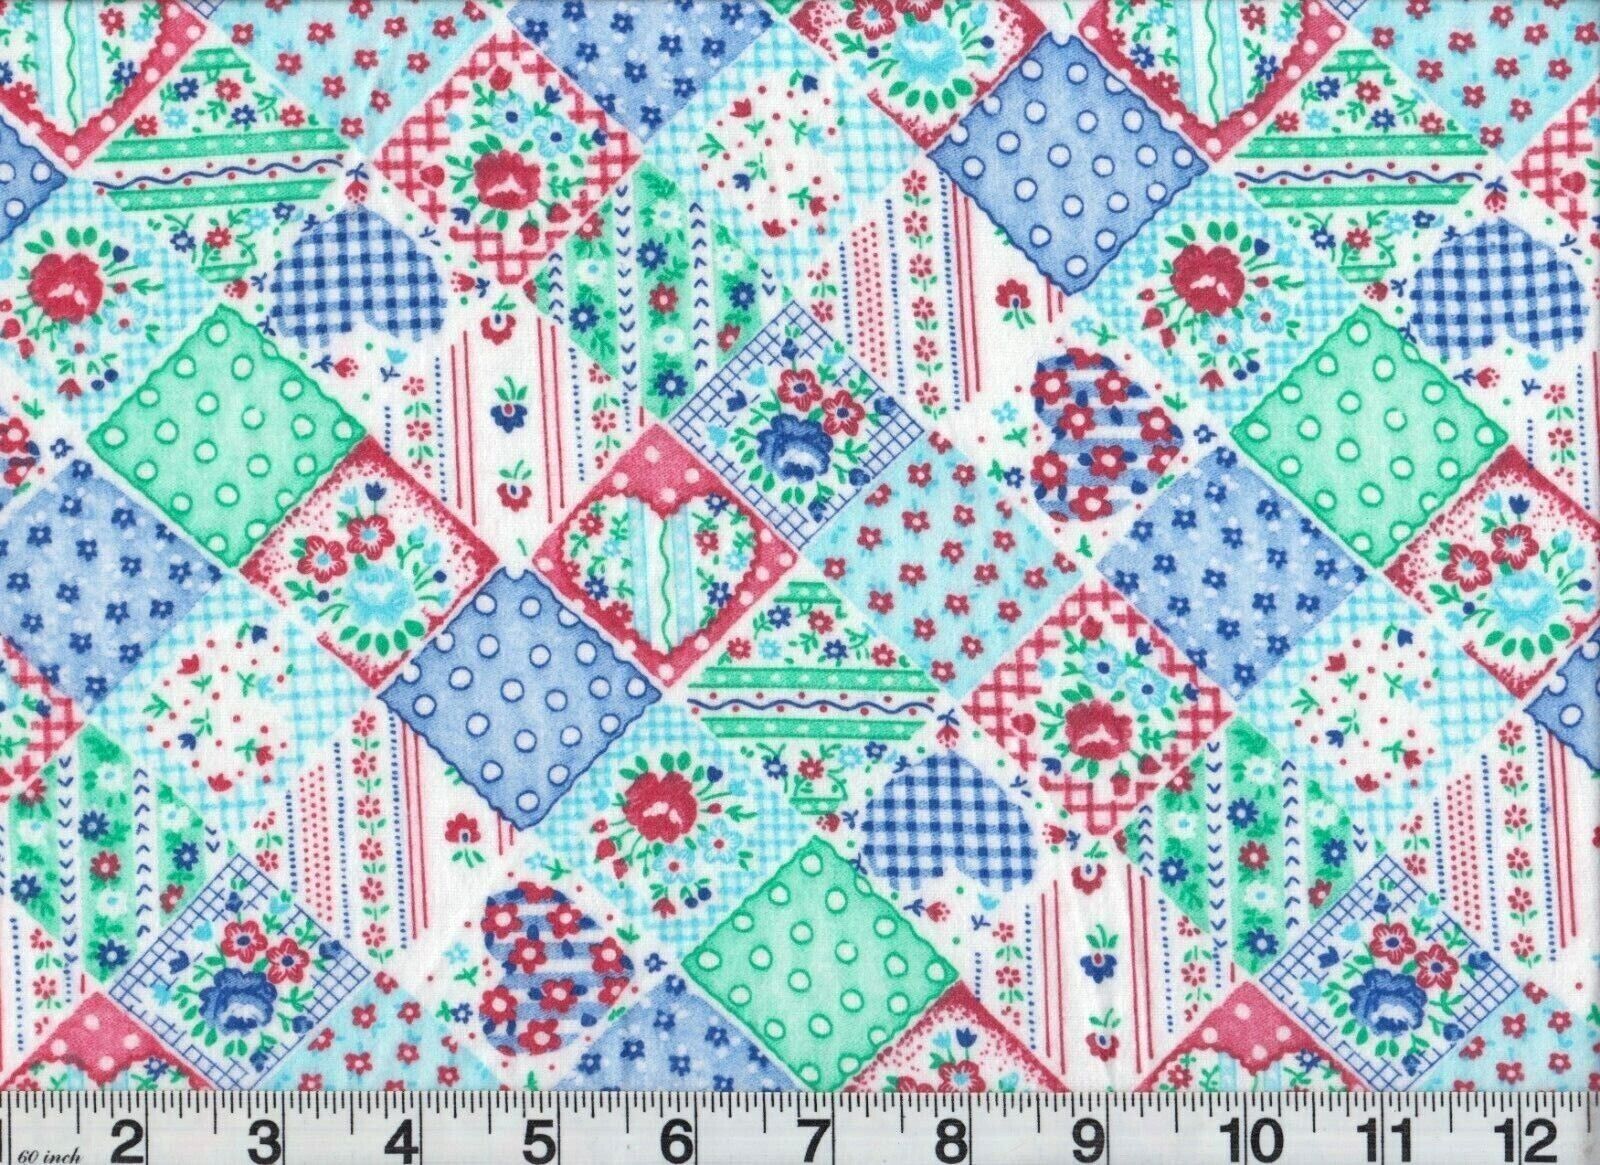 Flannel Fabric Country  Hearts Flowers Checked 1960s Soft Flannel Vintage